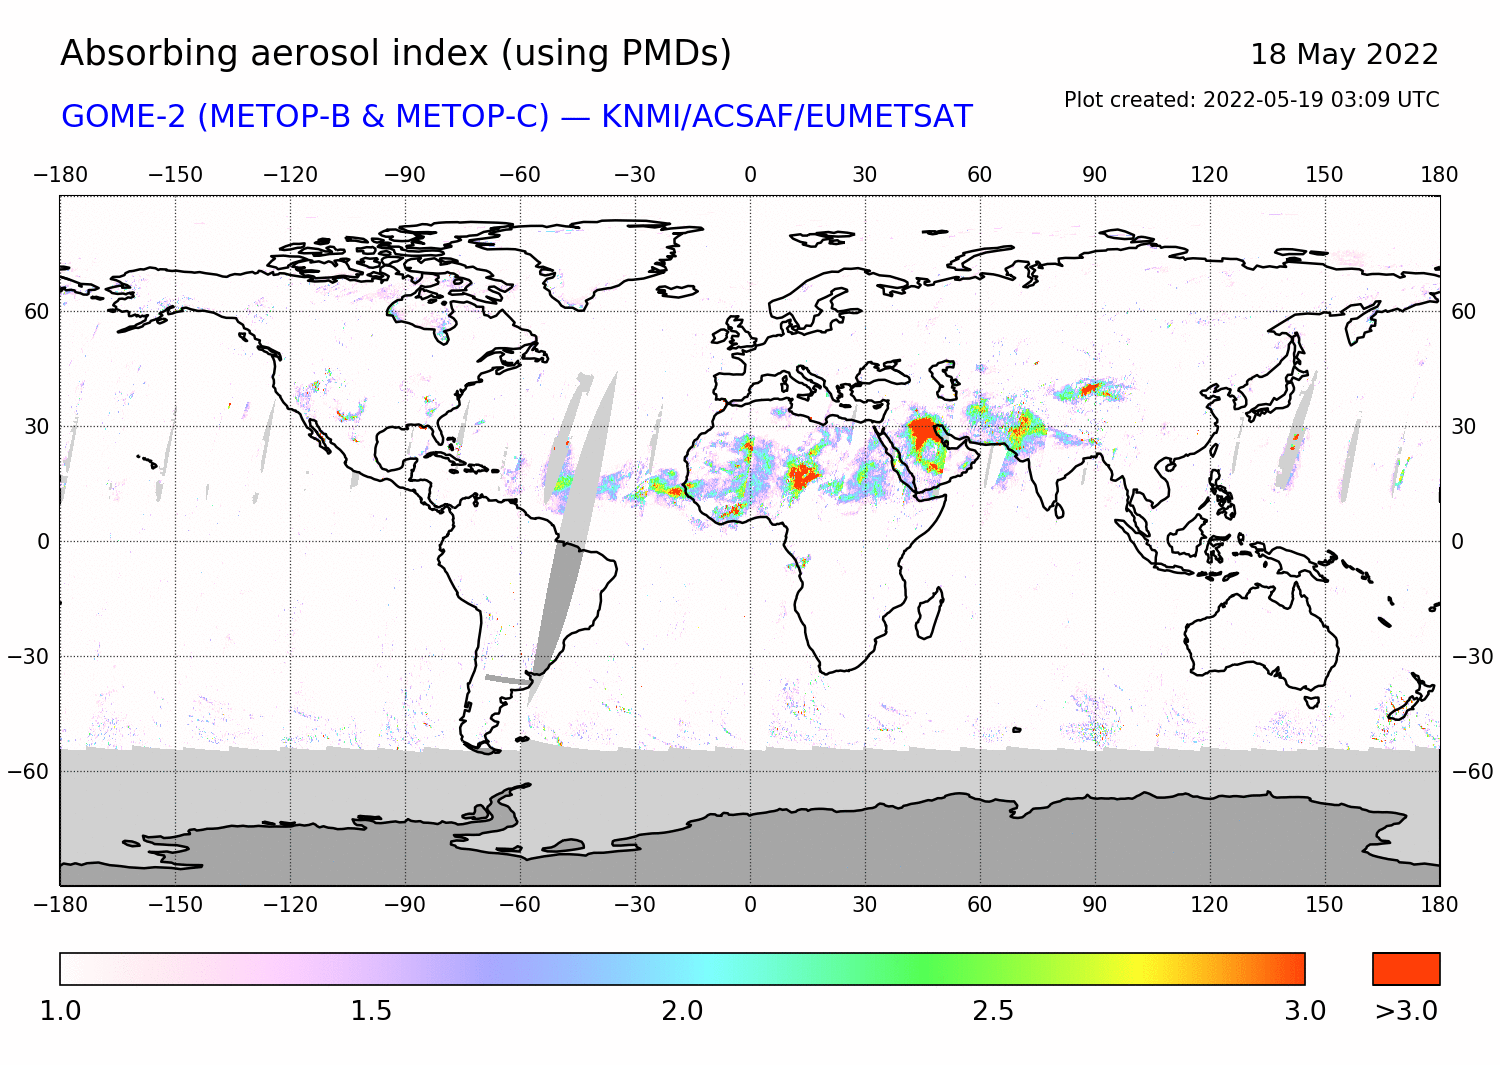 GOME-2 - Absorbing aerosol index of 18 May 2022